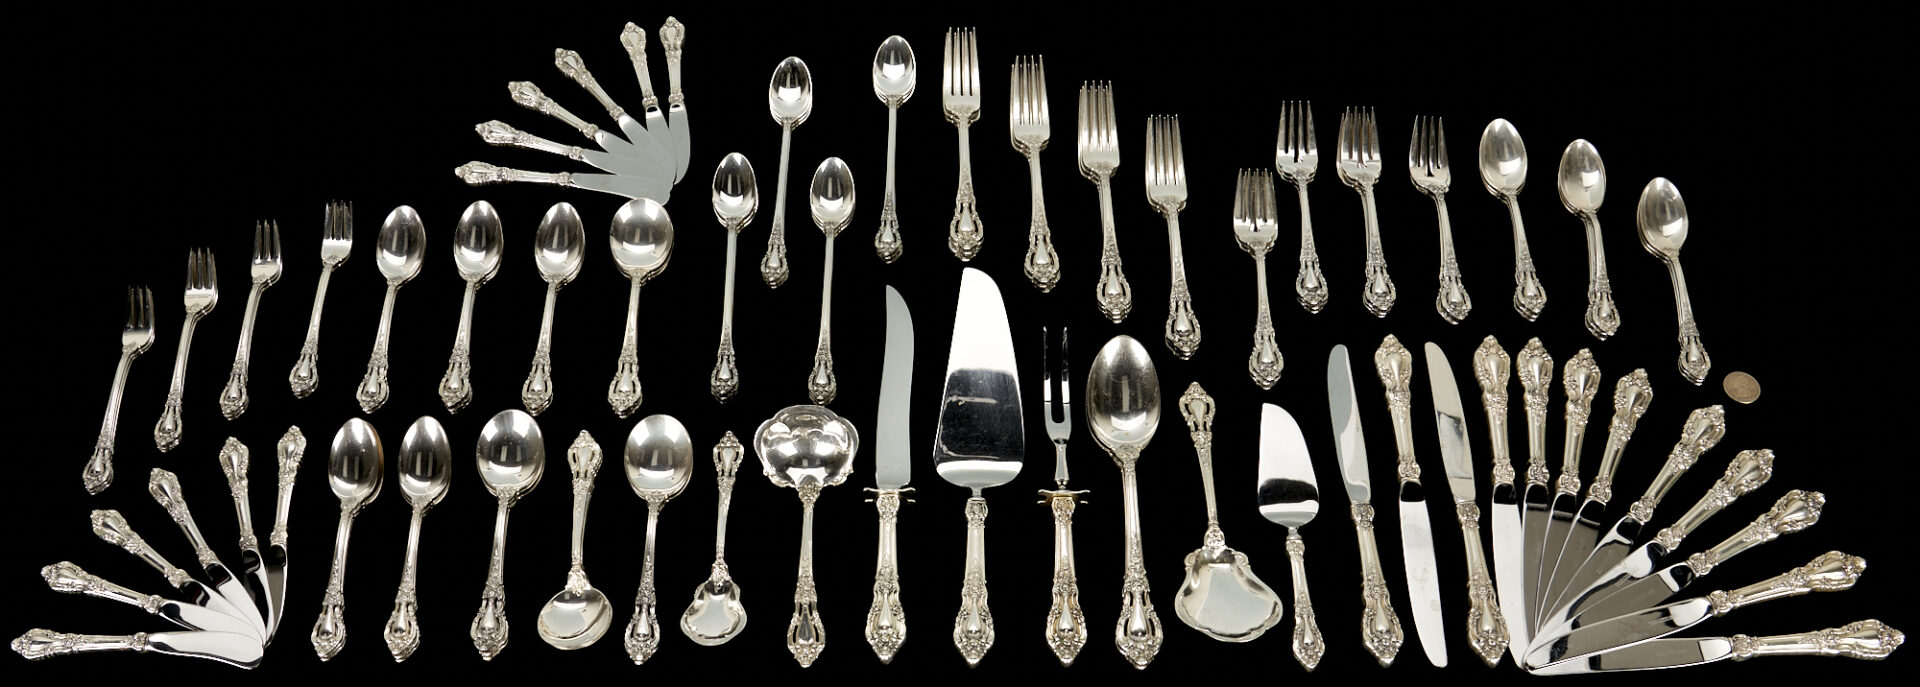 Lot 242: 115 pcs. Lunt Eloquence Sterling Silver Flatware Set, Service for 12